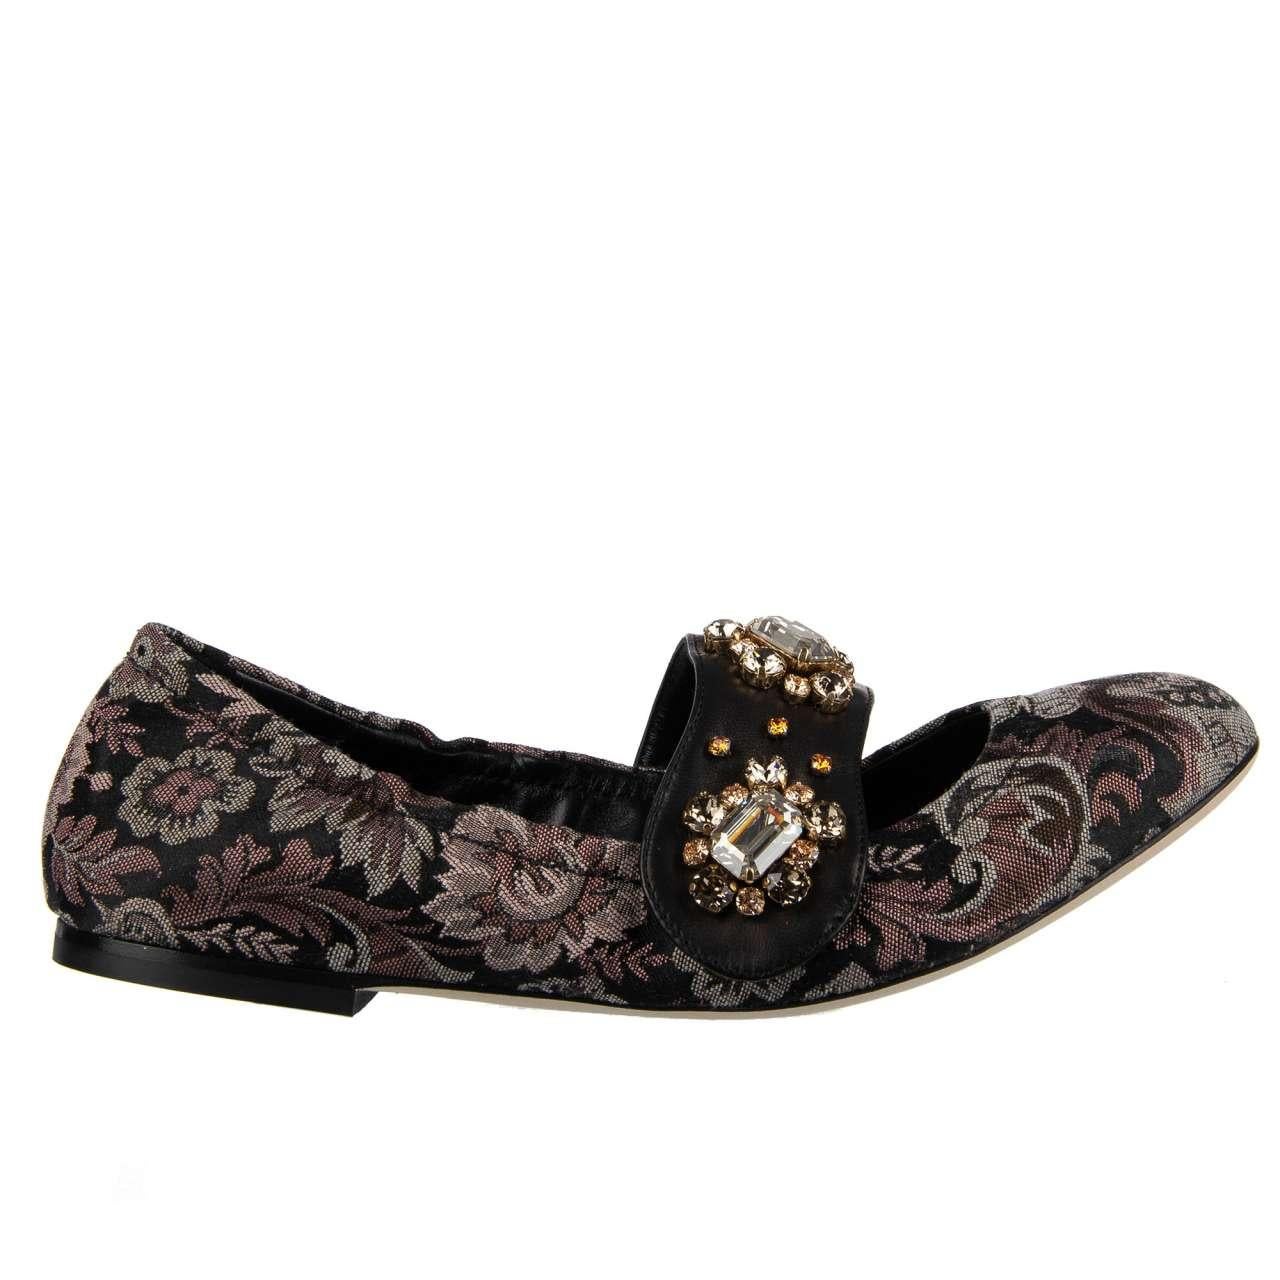 - Elastic brocade ballet flats VALLY with crystals embellished strap by DOLCE & GABBANA - MADE IN ITALY - New with Box - Former RRP: EUR 850 - Model: CB0096-B9H51-8D410 - Material: 34% Acetat, 17% Wolle, 17% Silk, 12% Polyester, 10% Cotton, 10%